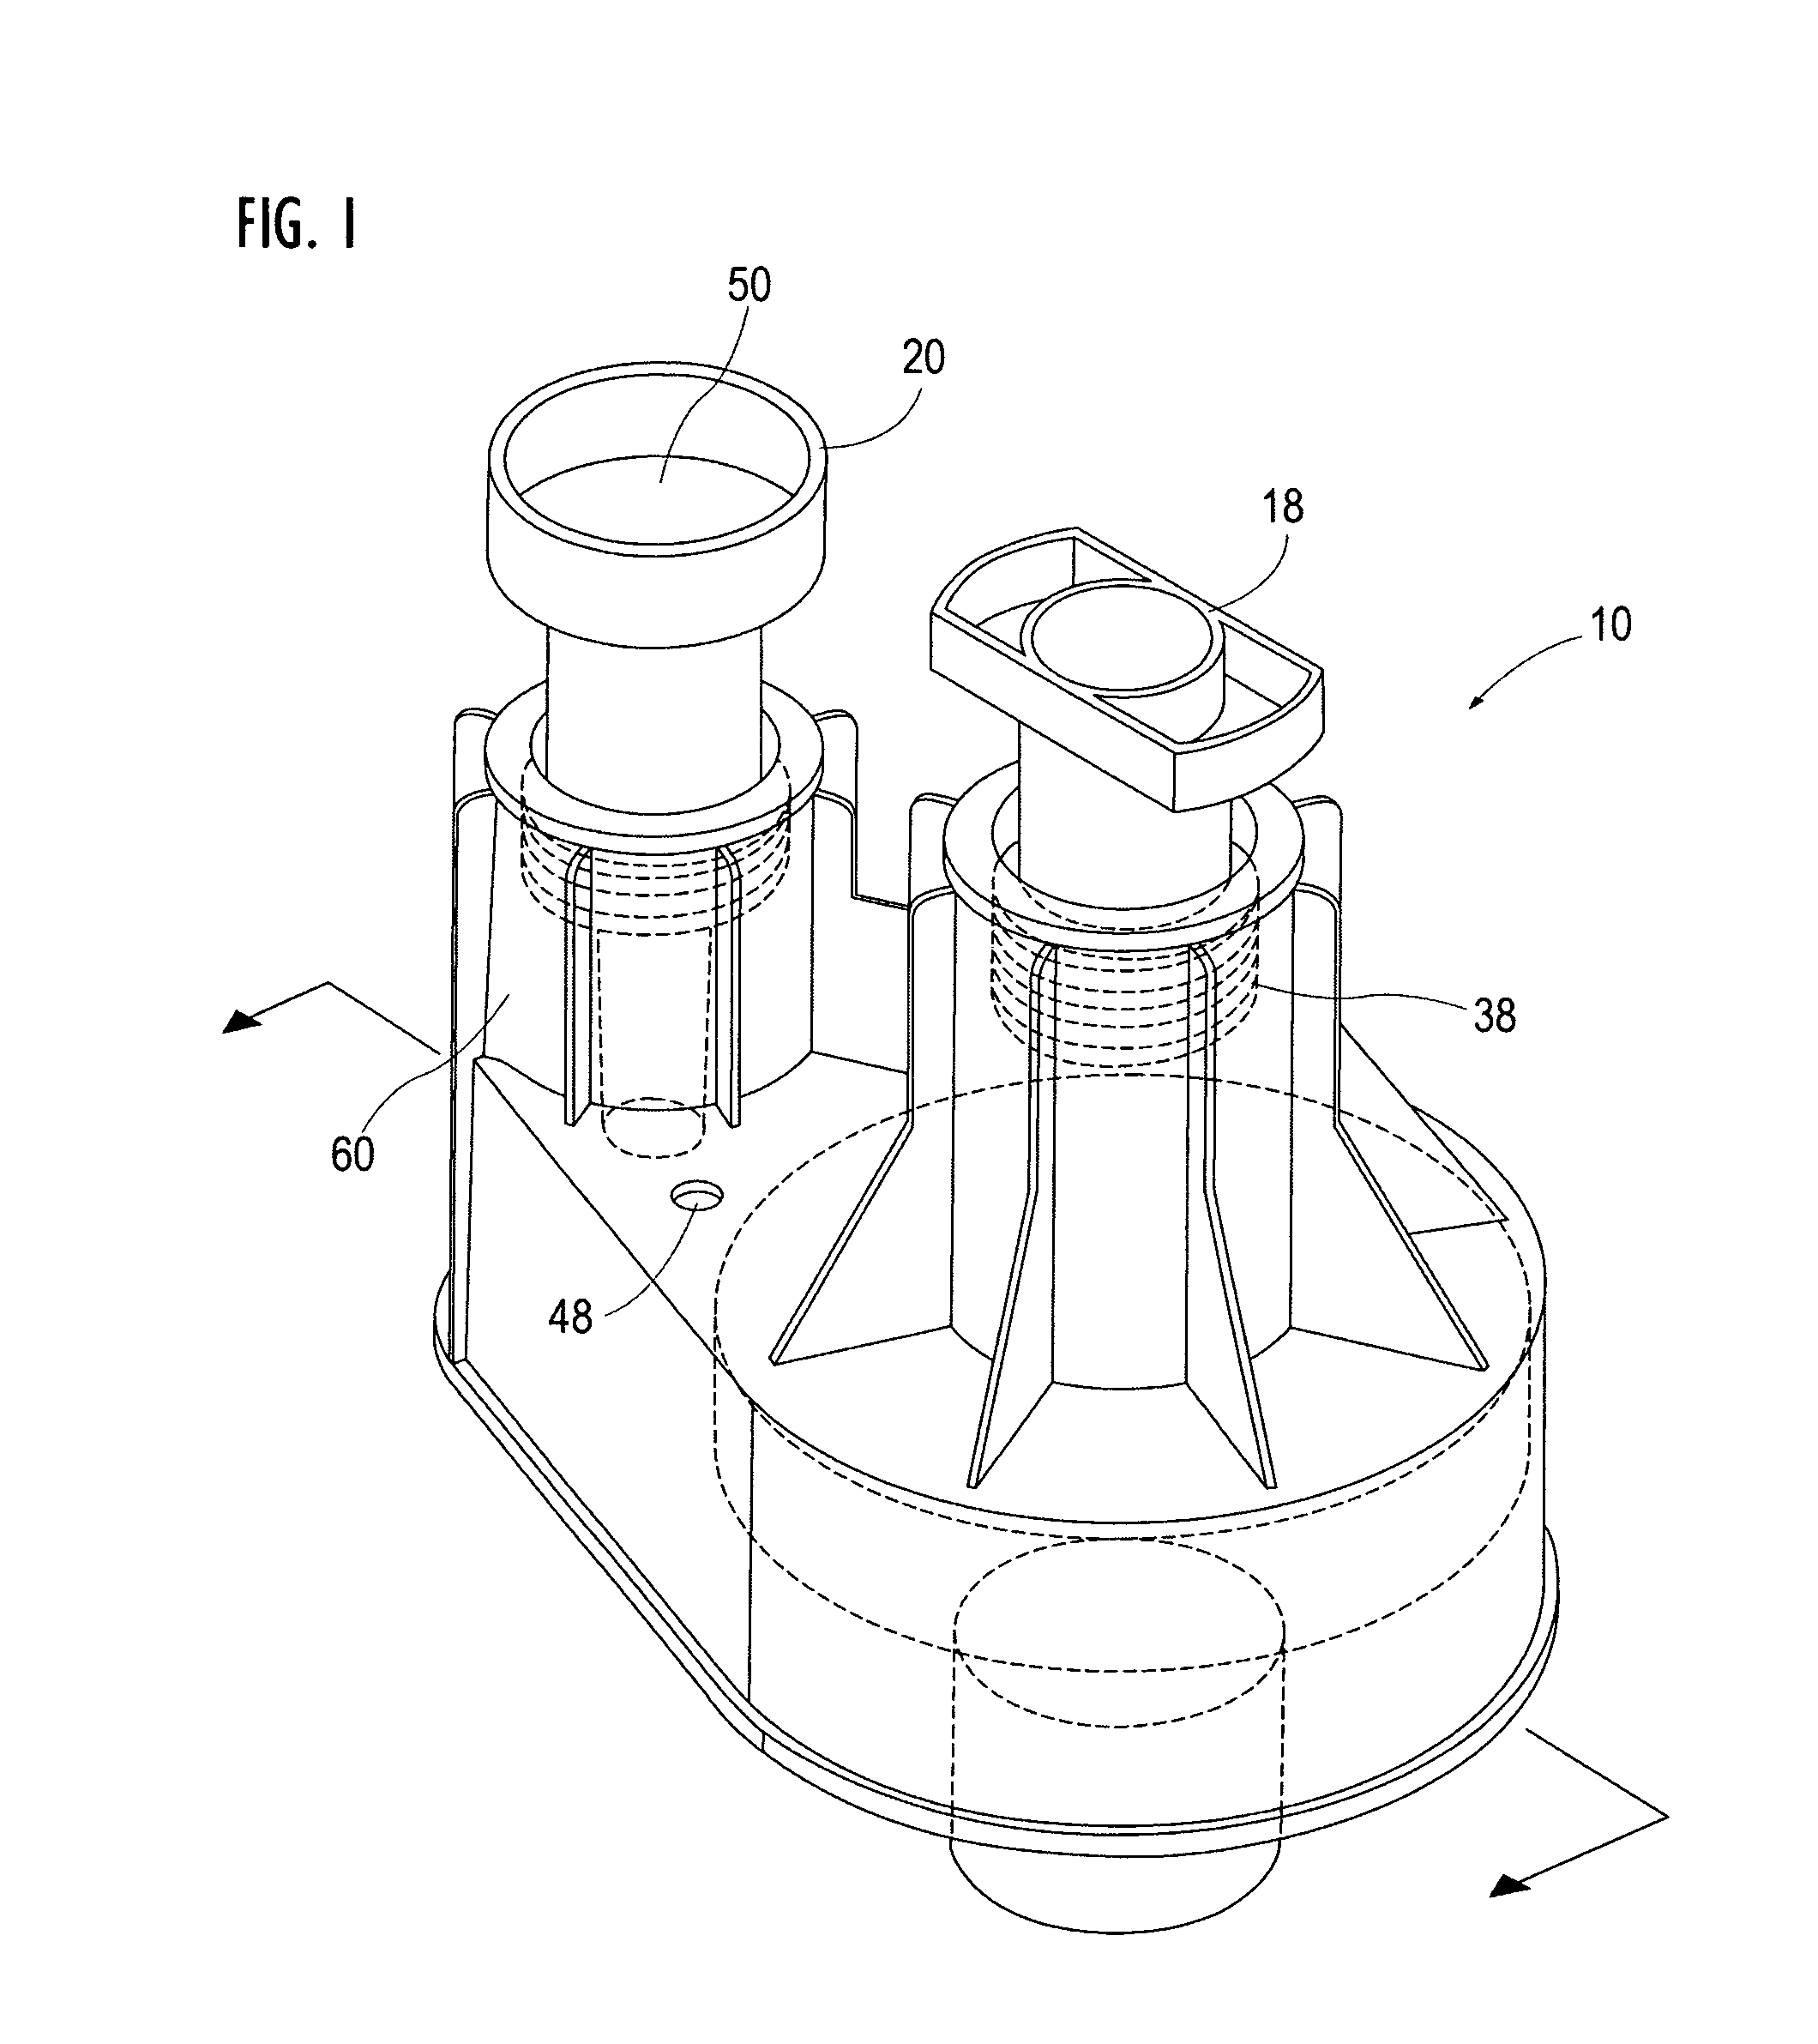 Enhanced manually actuated pressure controlled modulator technology